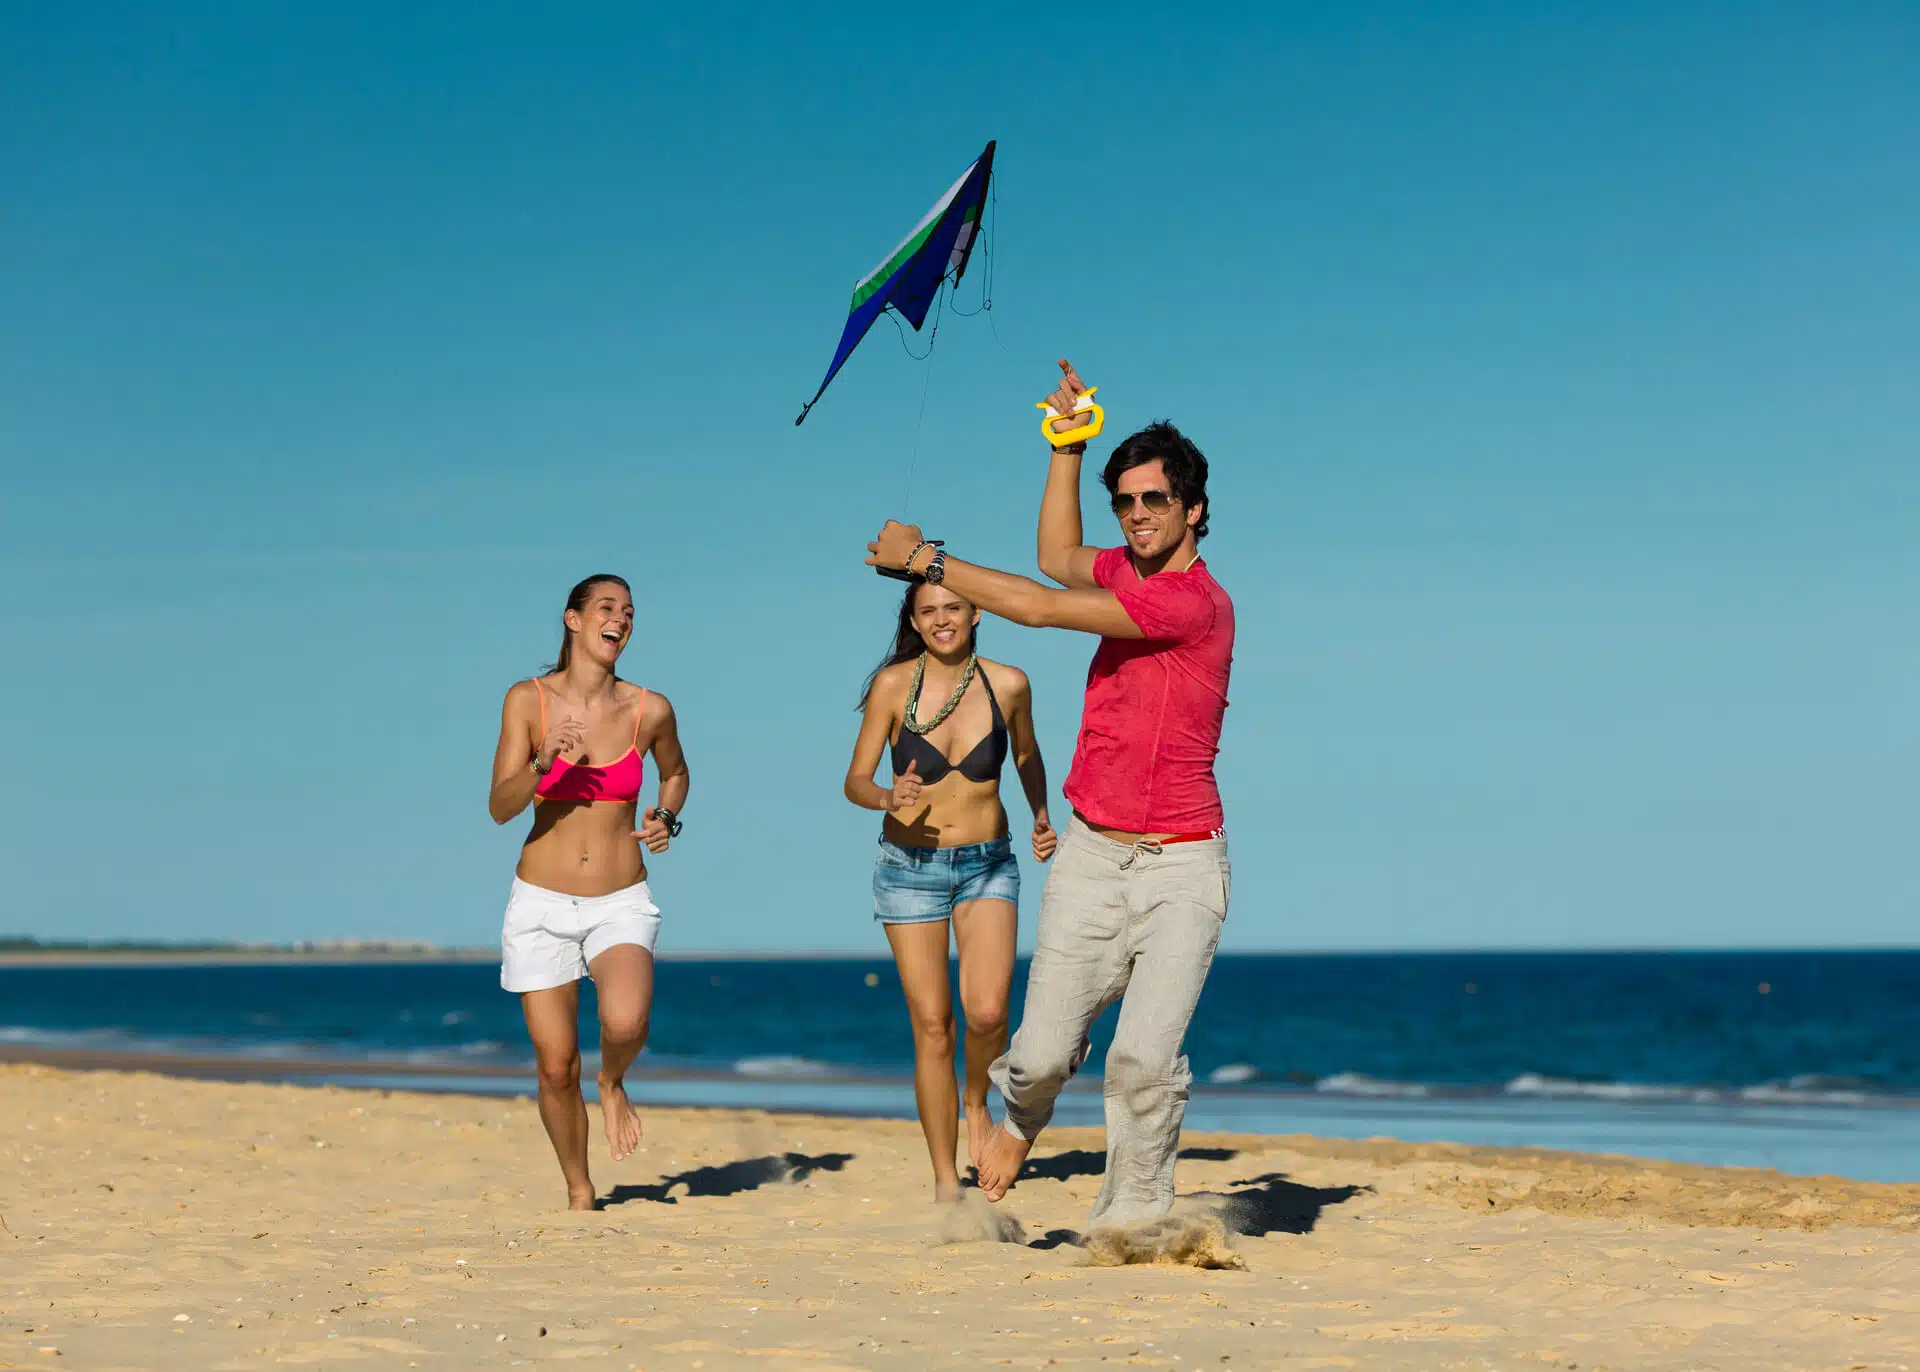 man and two women running on beach with kite